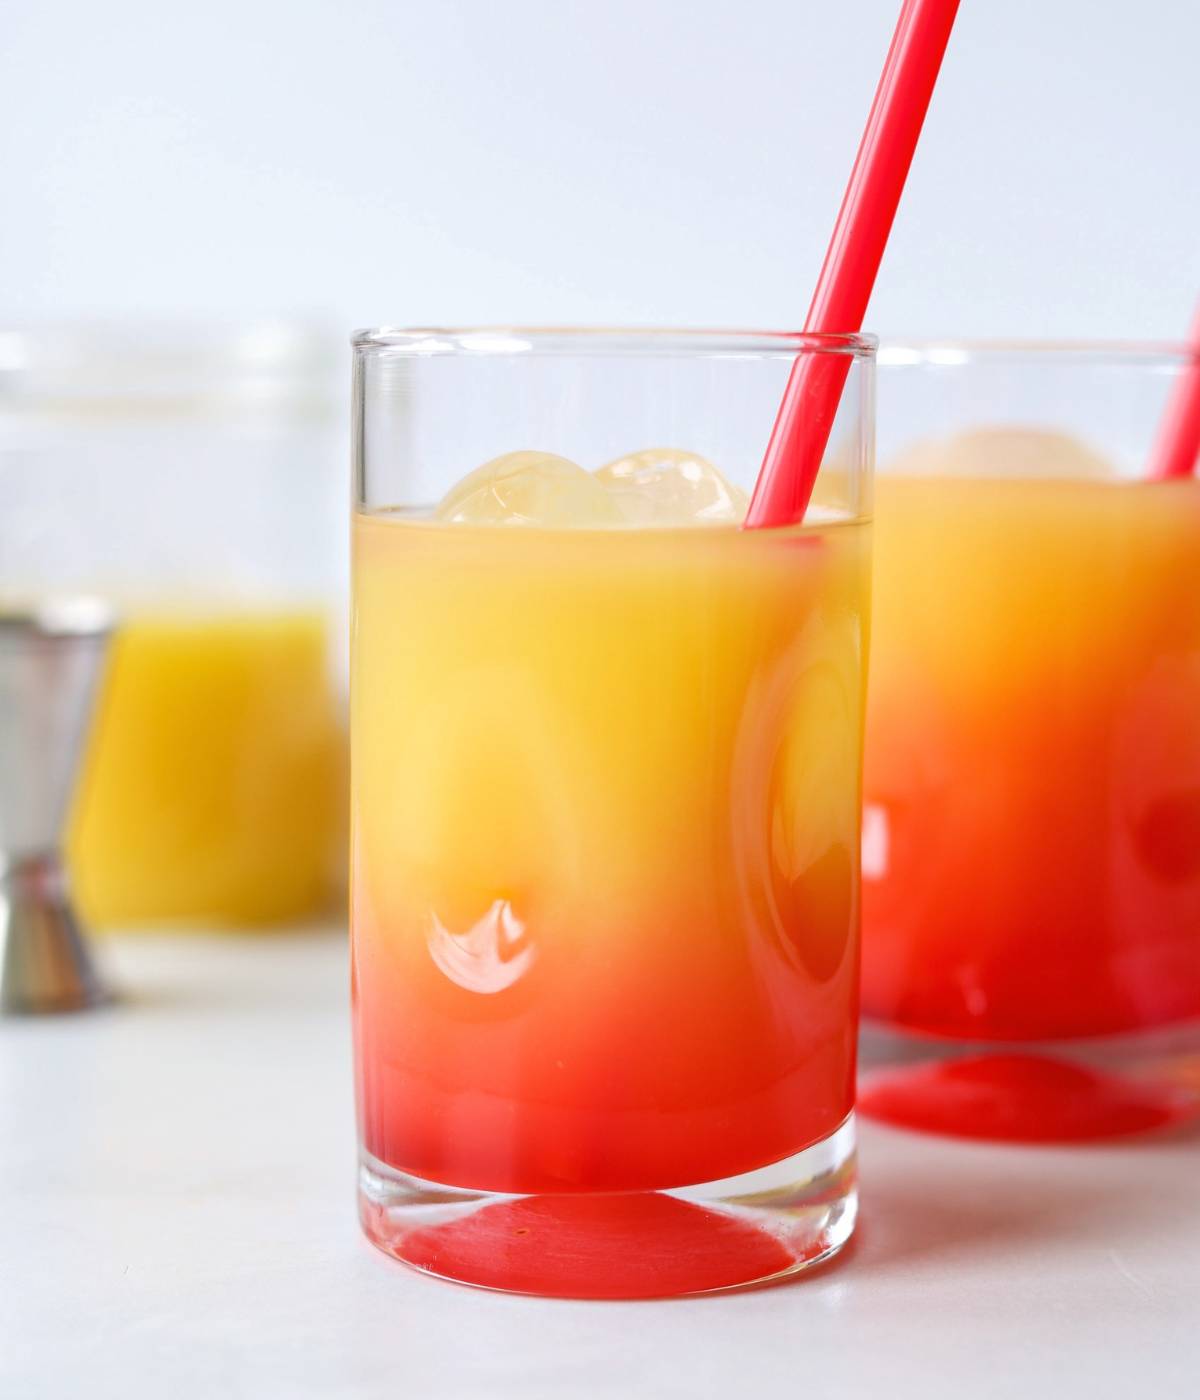 Vodka sunrise in a small cocktail glass with red straw.